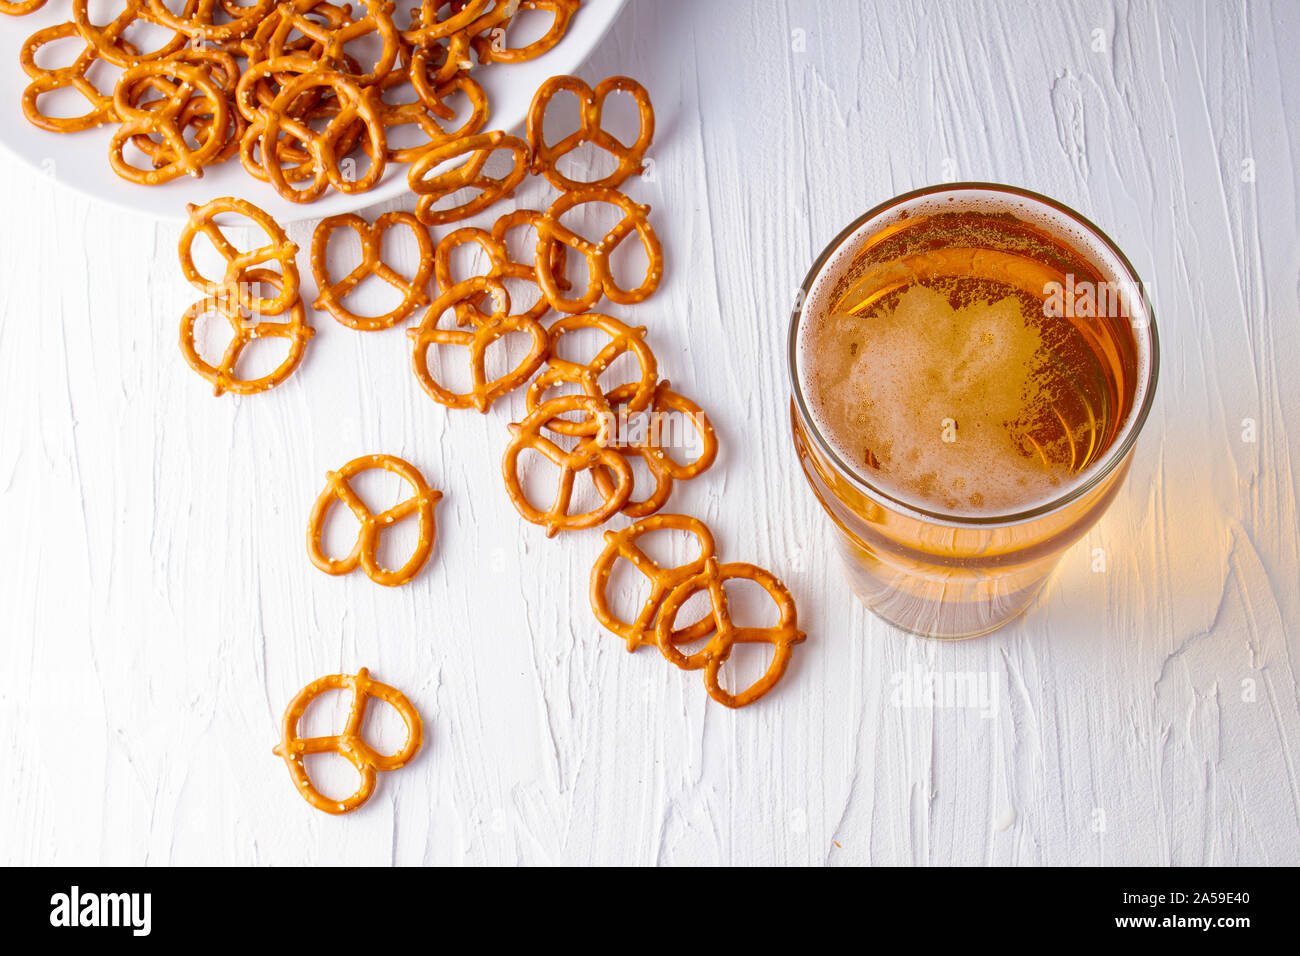 Top view of a Beer and pretzels on a white background Stock Photo